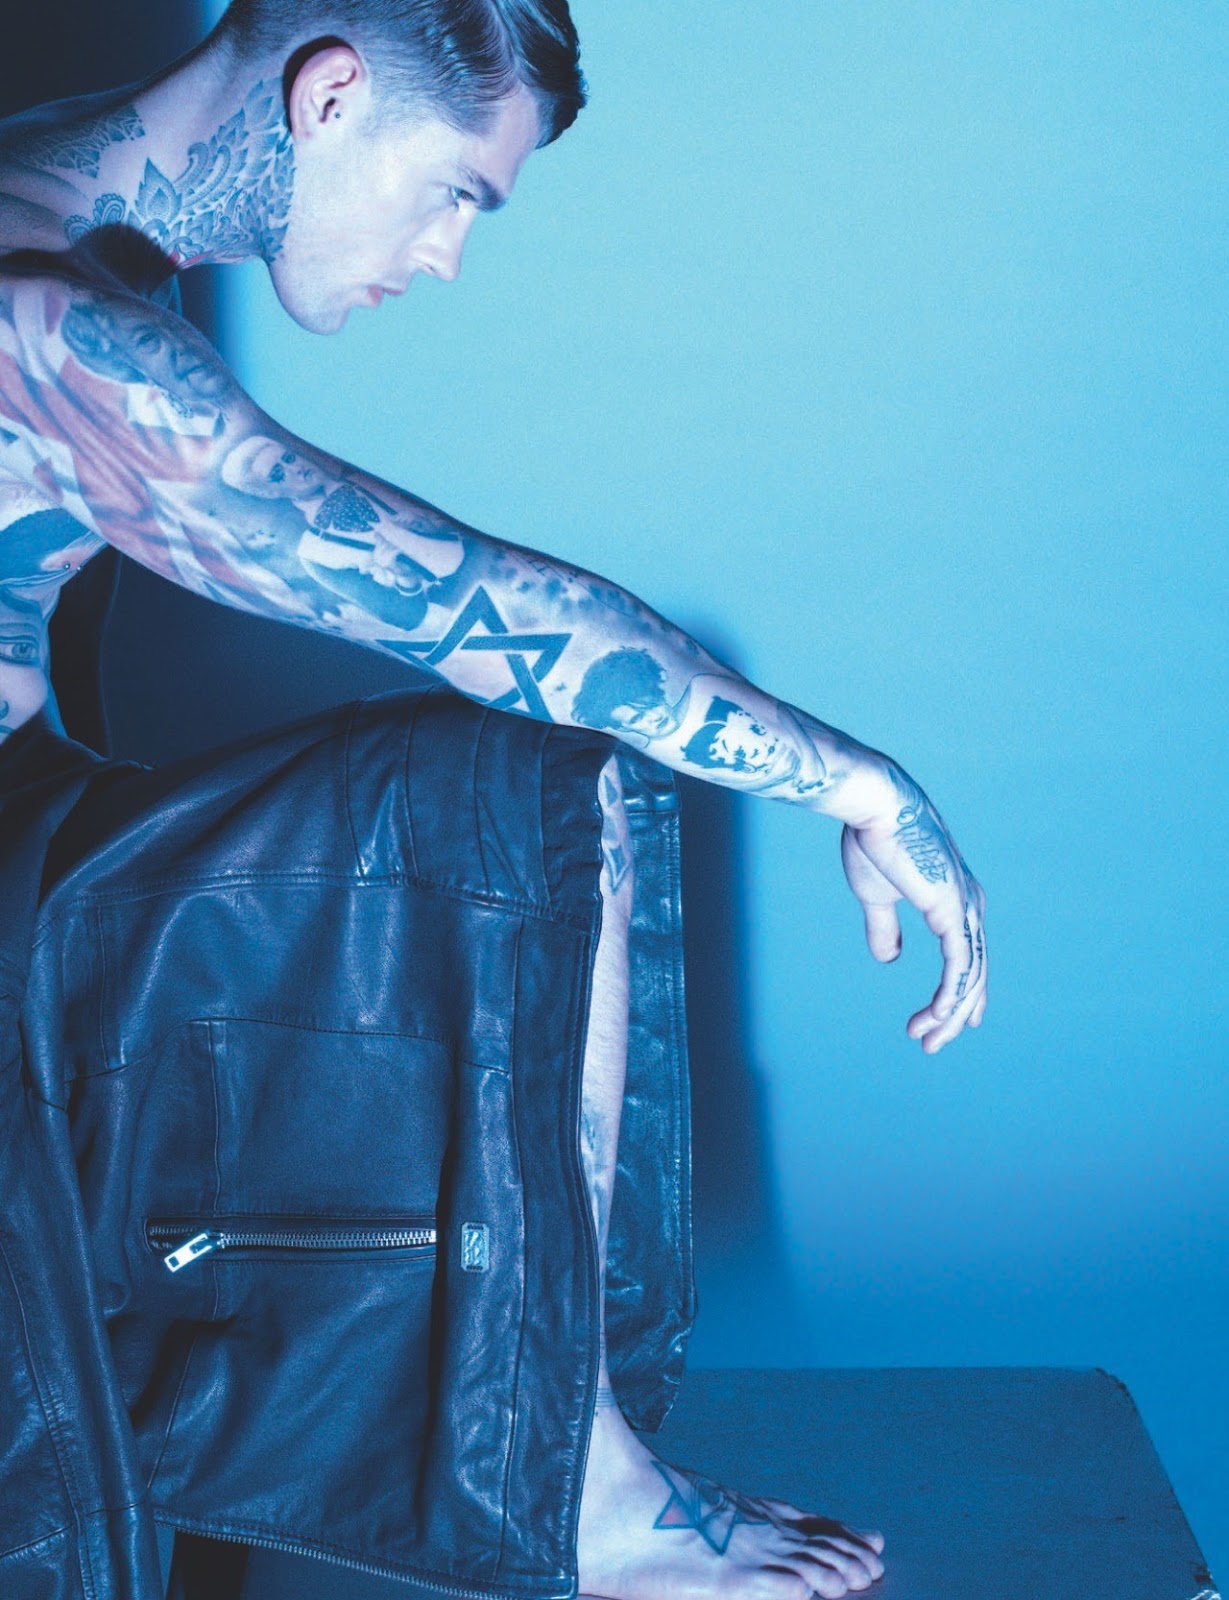 LICENSE TO THRILL: MODEL STEPHEN JAMES COVERS ADON 